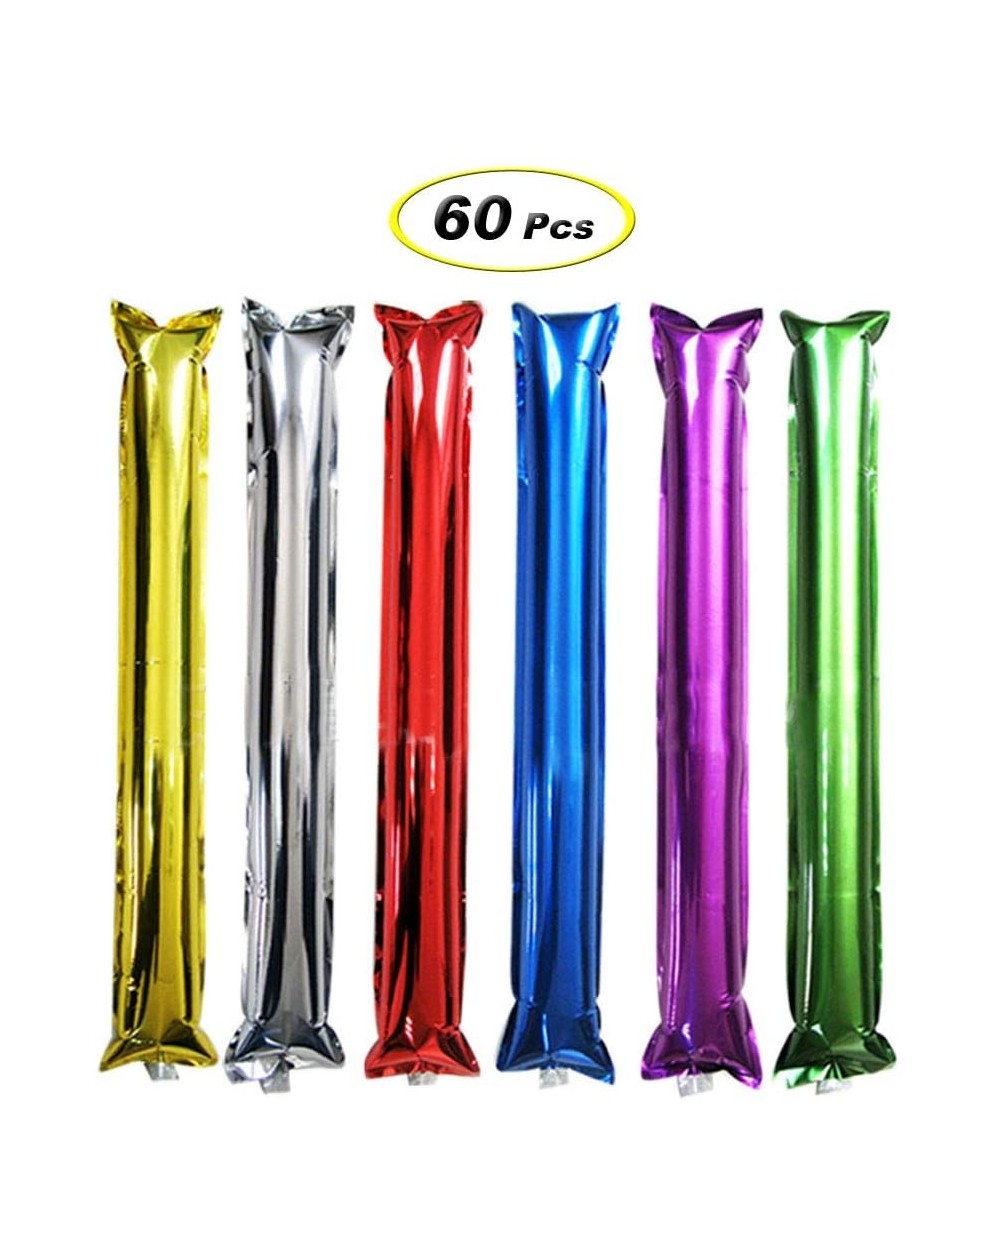 Balloons 60 Pcs Foil Bam Bam Thunder Sticks- Long Balloon Inflatable Cheer Sticks Inflating Rods in 6 Different Colors for Bi...